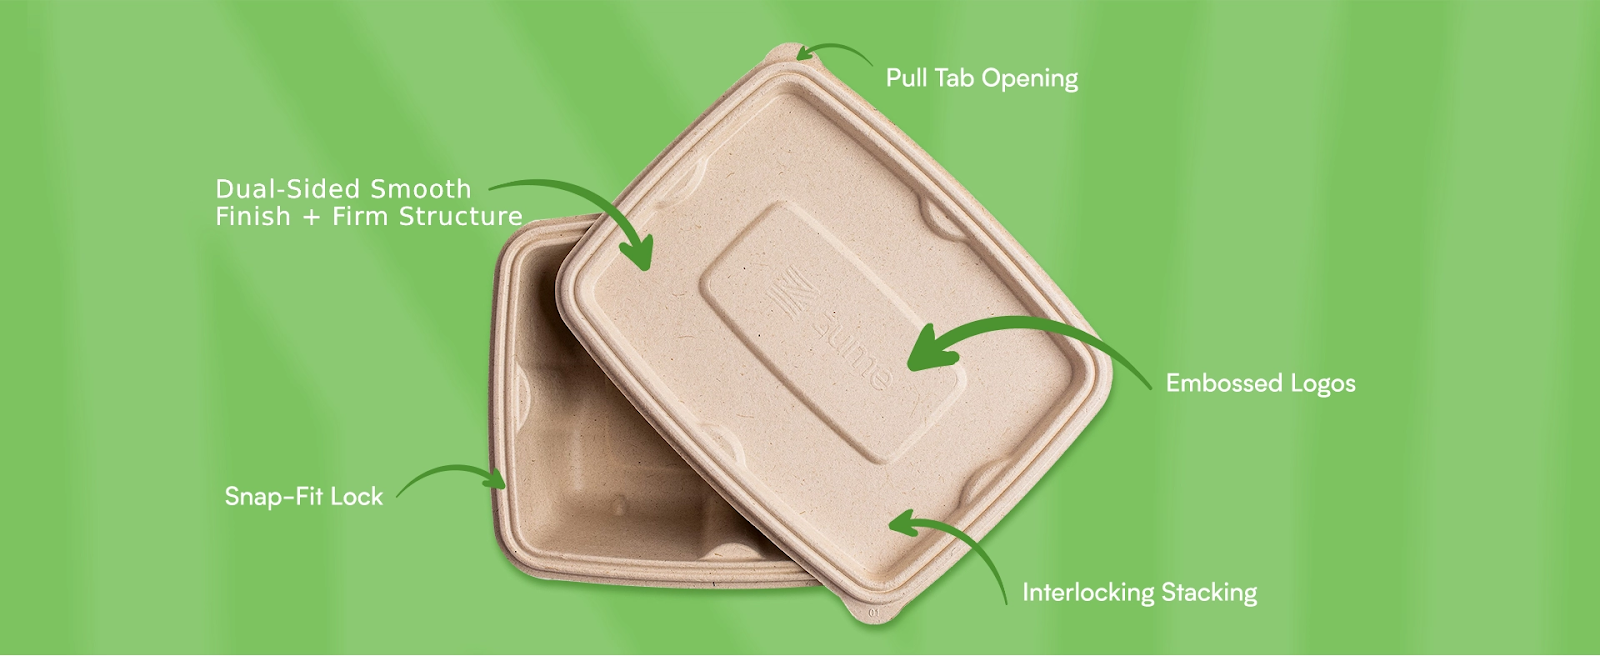 Compostable packaging food service product line for Zume